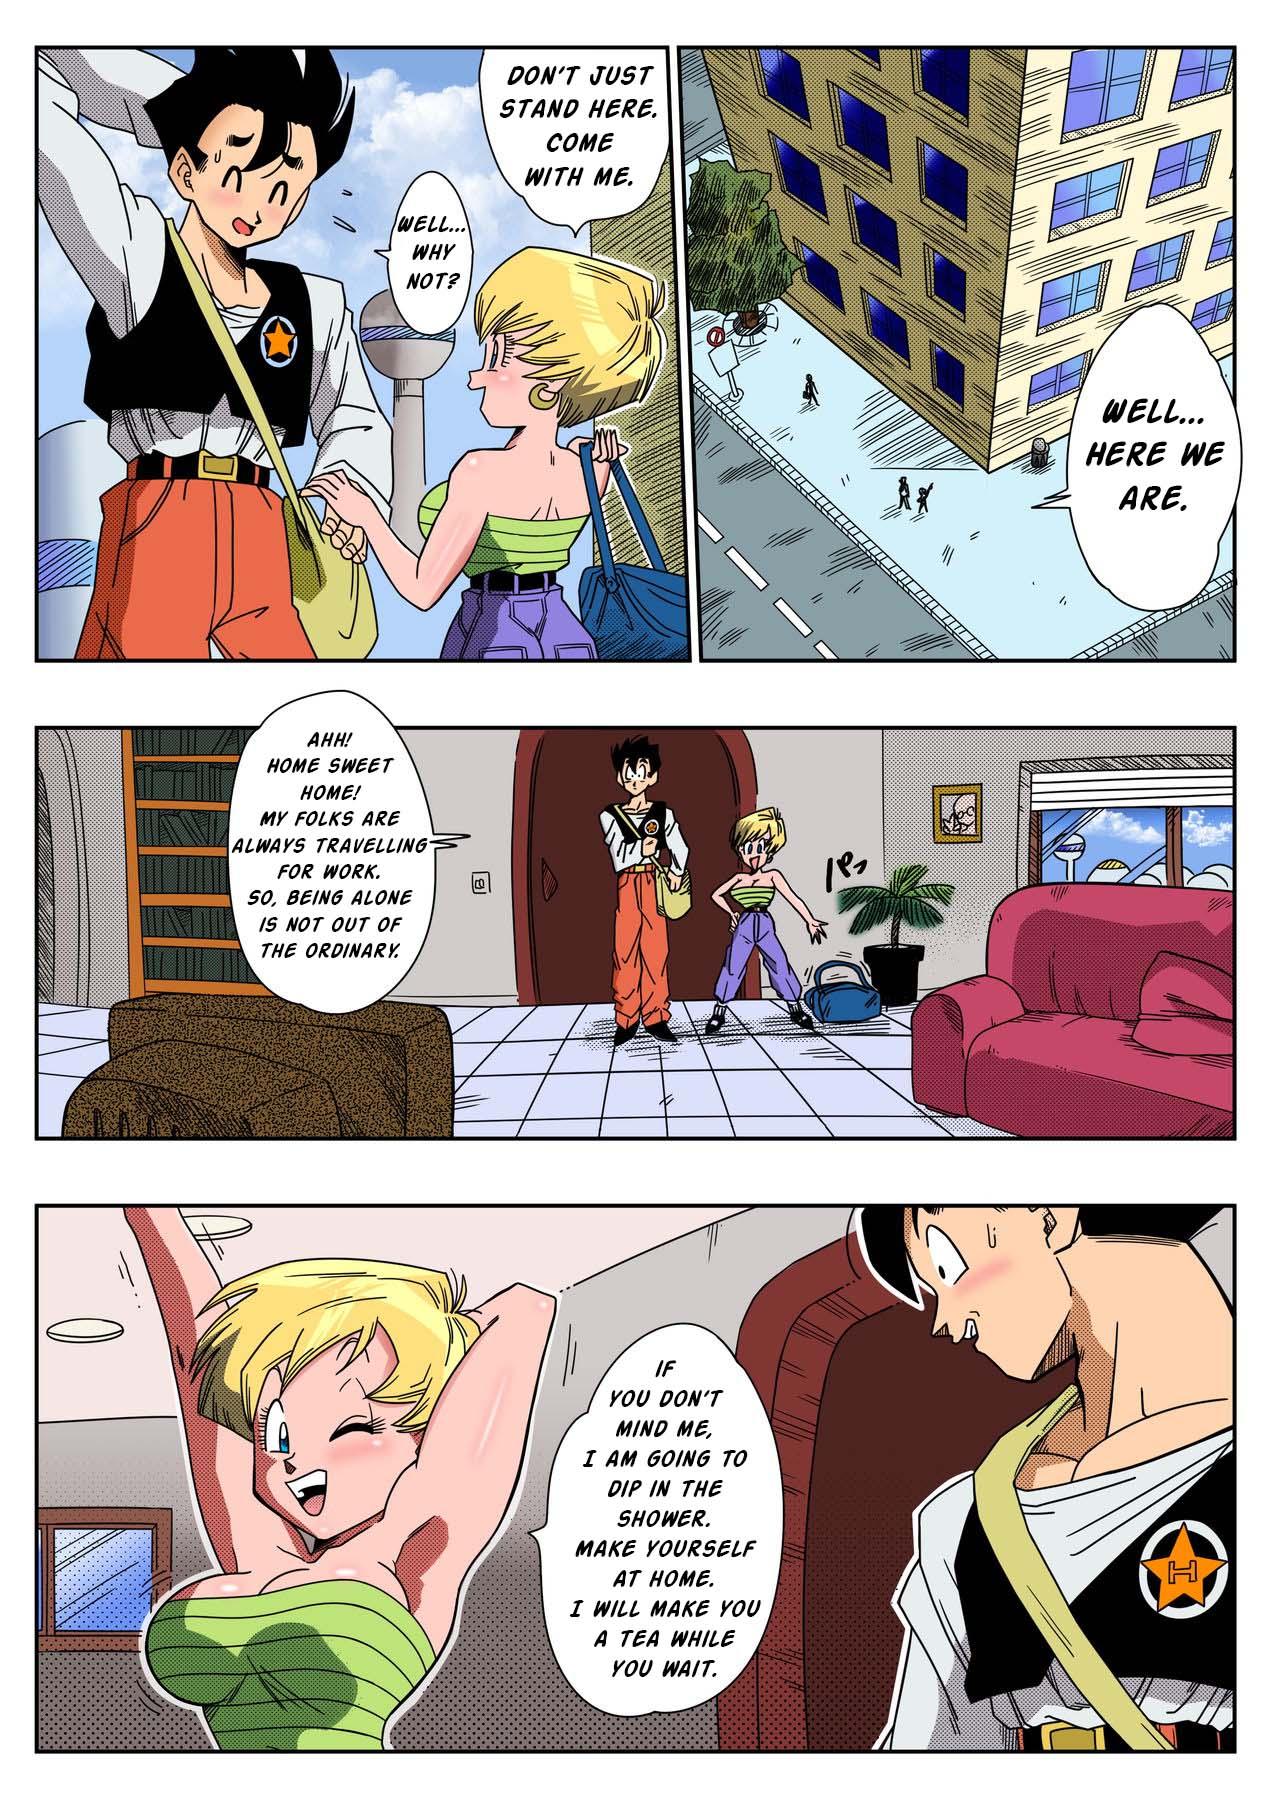 Dominant LOVE TRIANGLE Z Part 1-4 - Dragon ball z Behind - Page 6